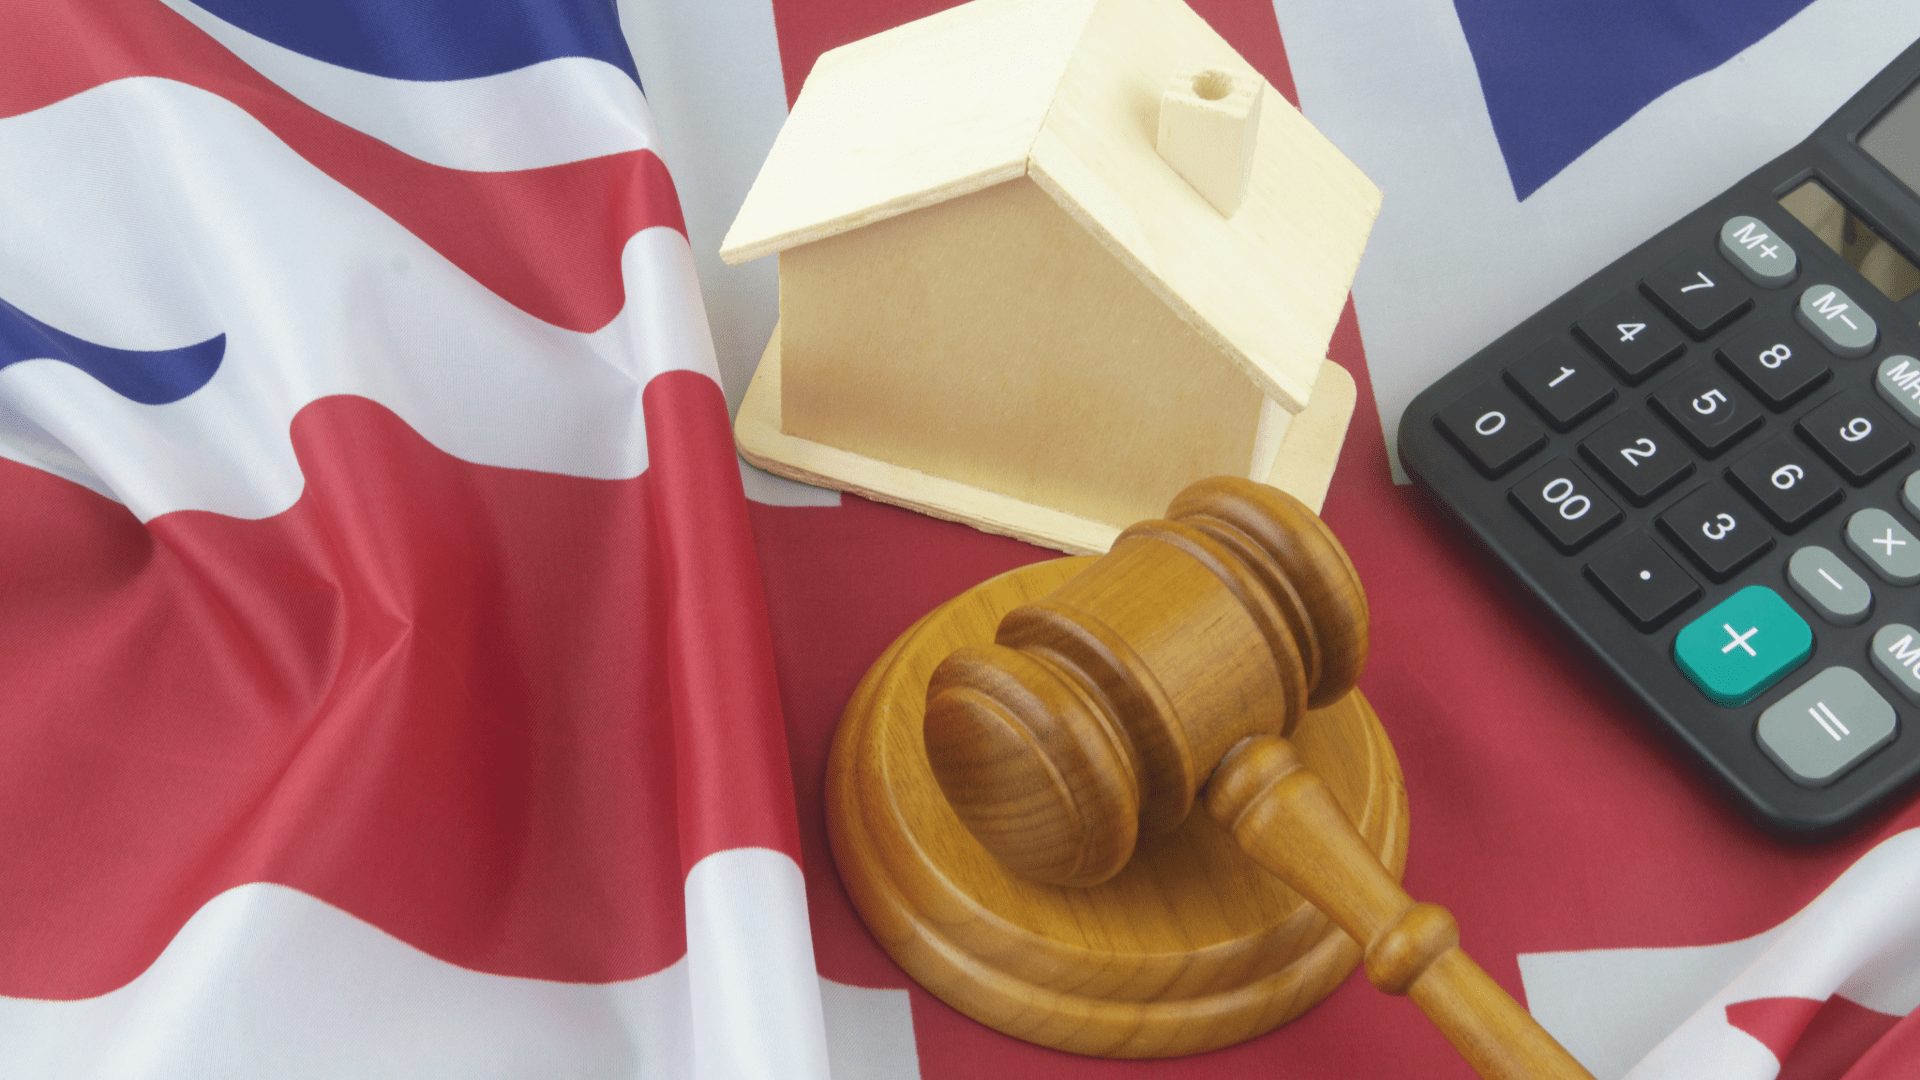 A symbolic composition featuring a wooden gavel, a miniature house model, and a calculator on a Norwegian flag, representing the intersection of law, finance, and housing in Norway.